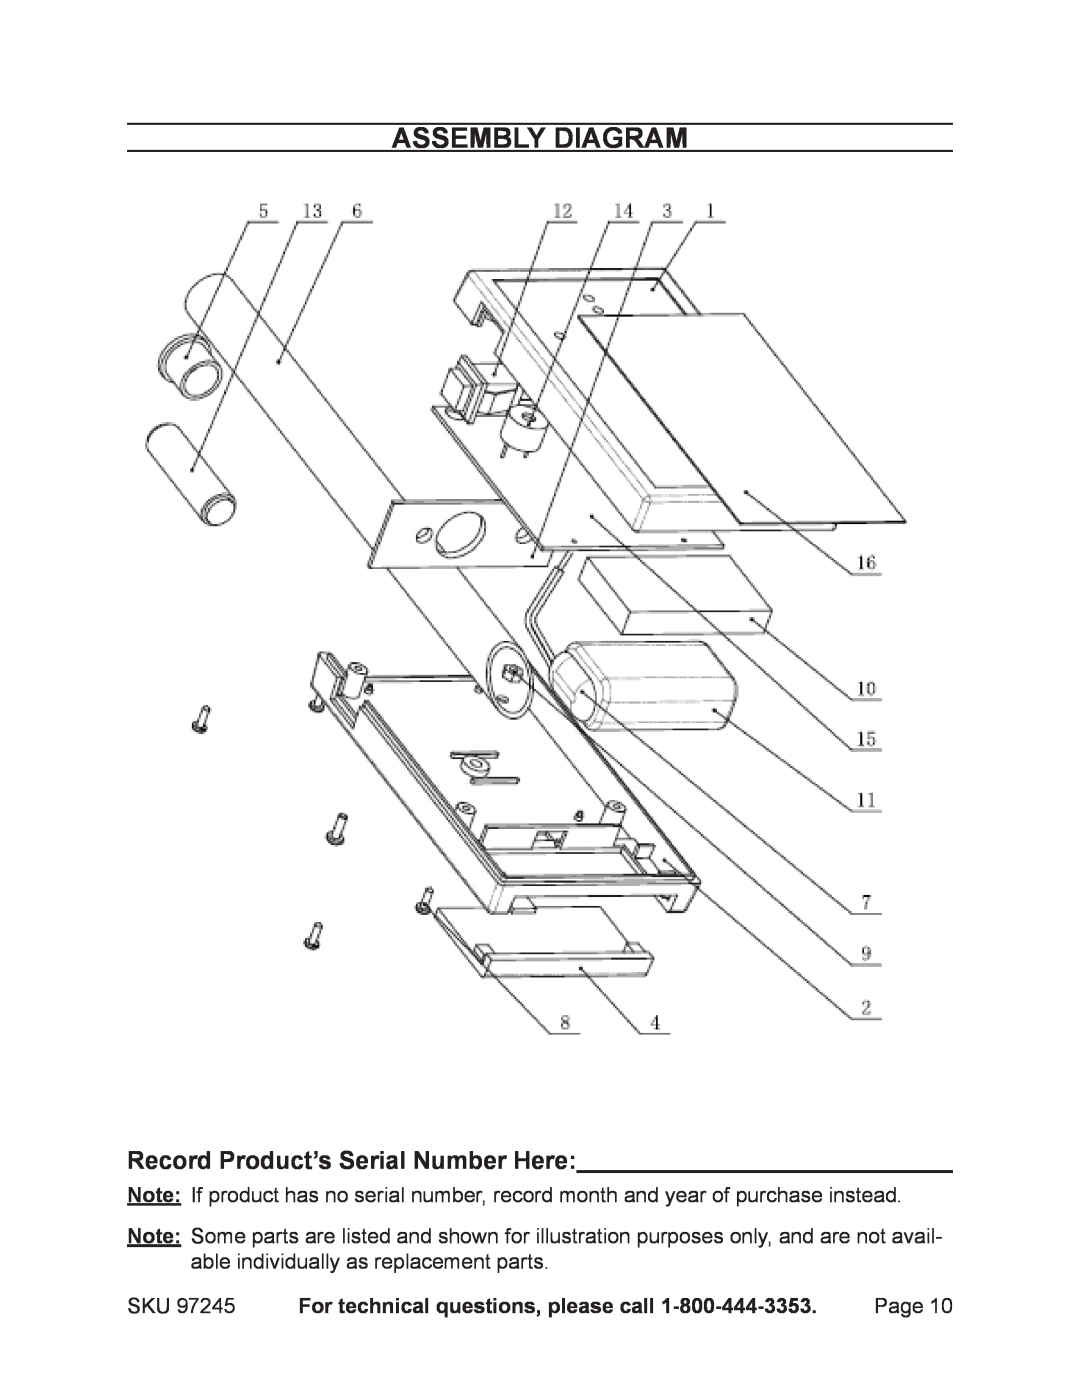 Harbor Freight Tools 97245 Assembly Diagram, Record Product’s Serial Number Here, For technical questions, please call 